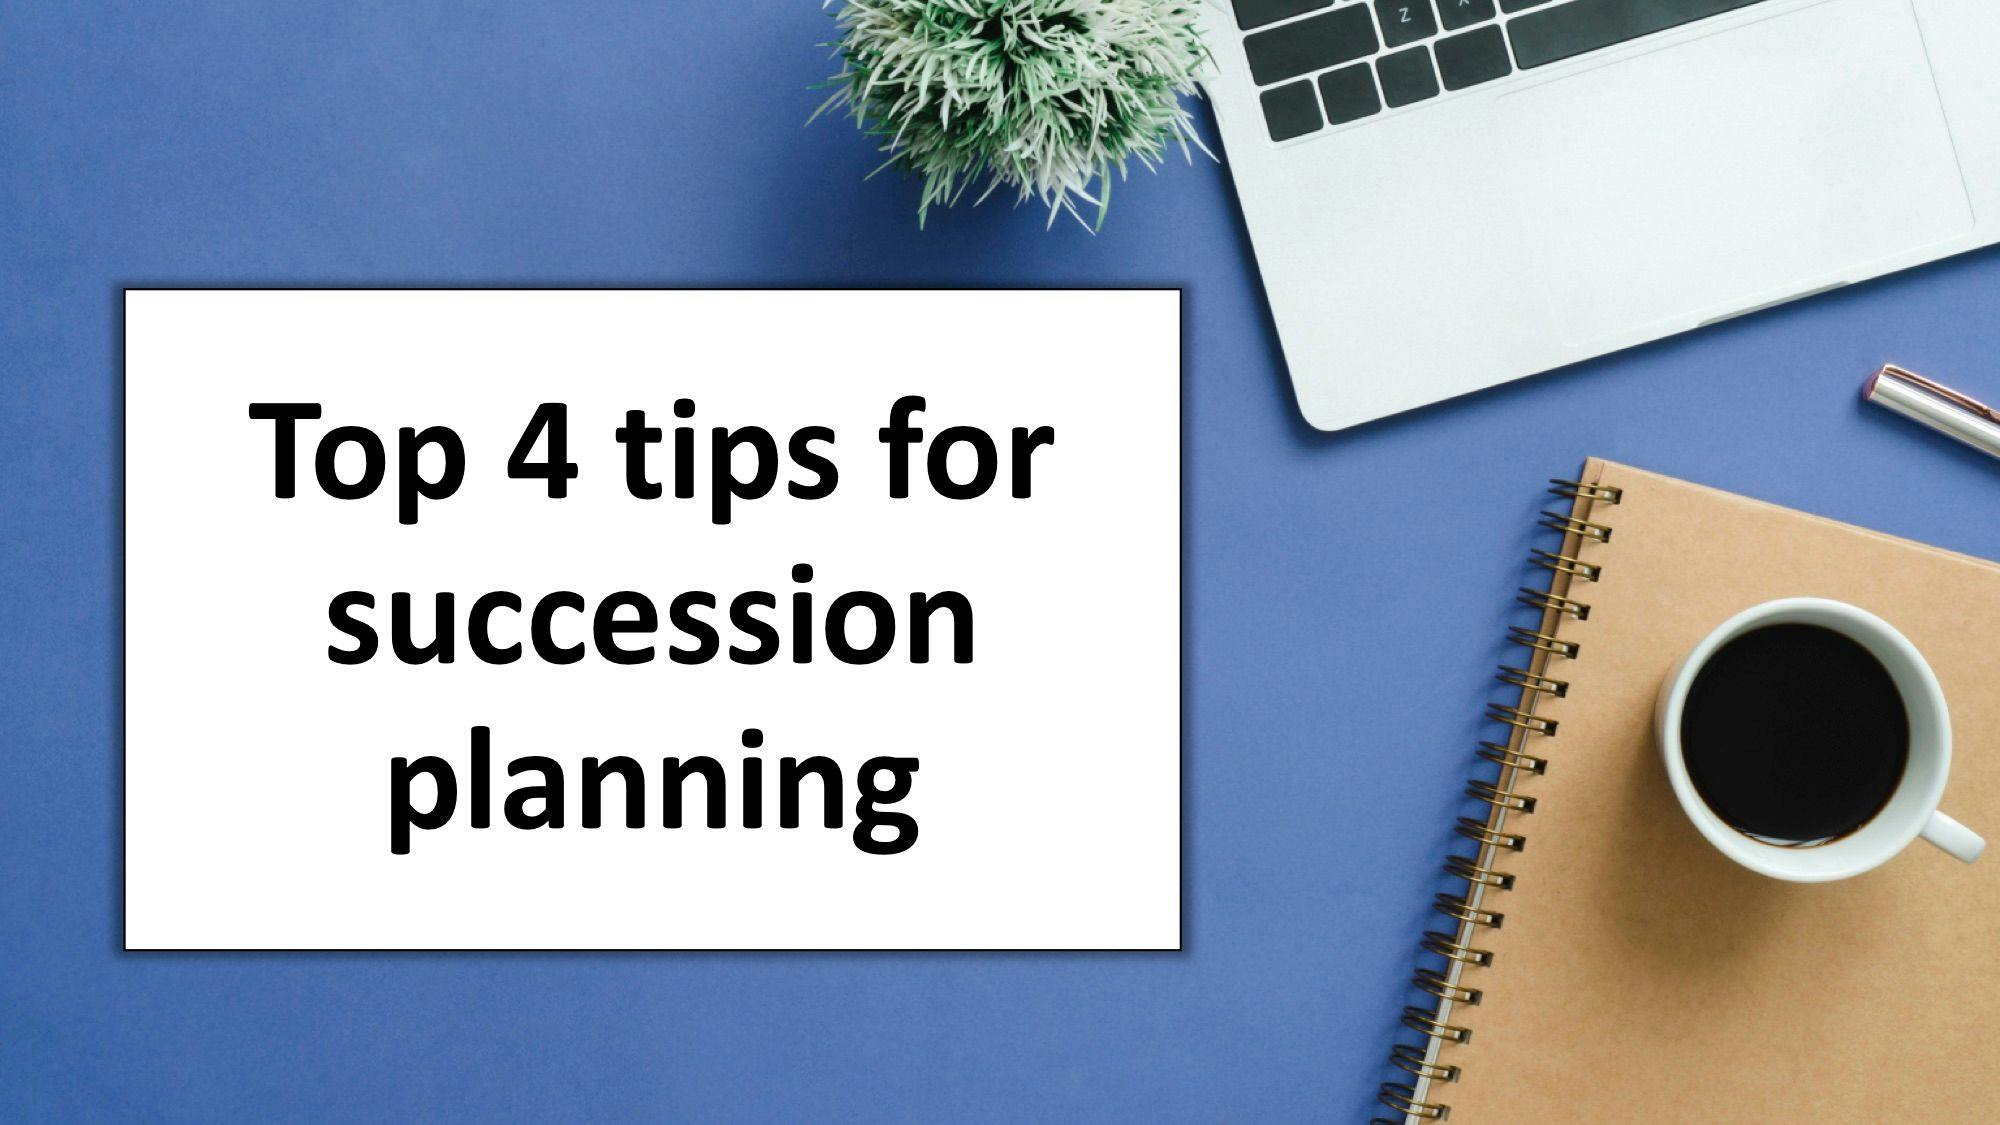 Top 4 tips for succession planning